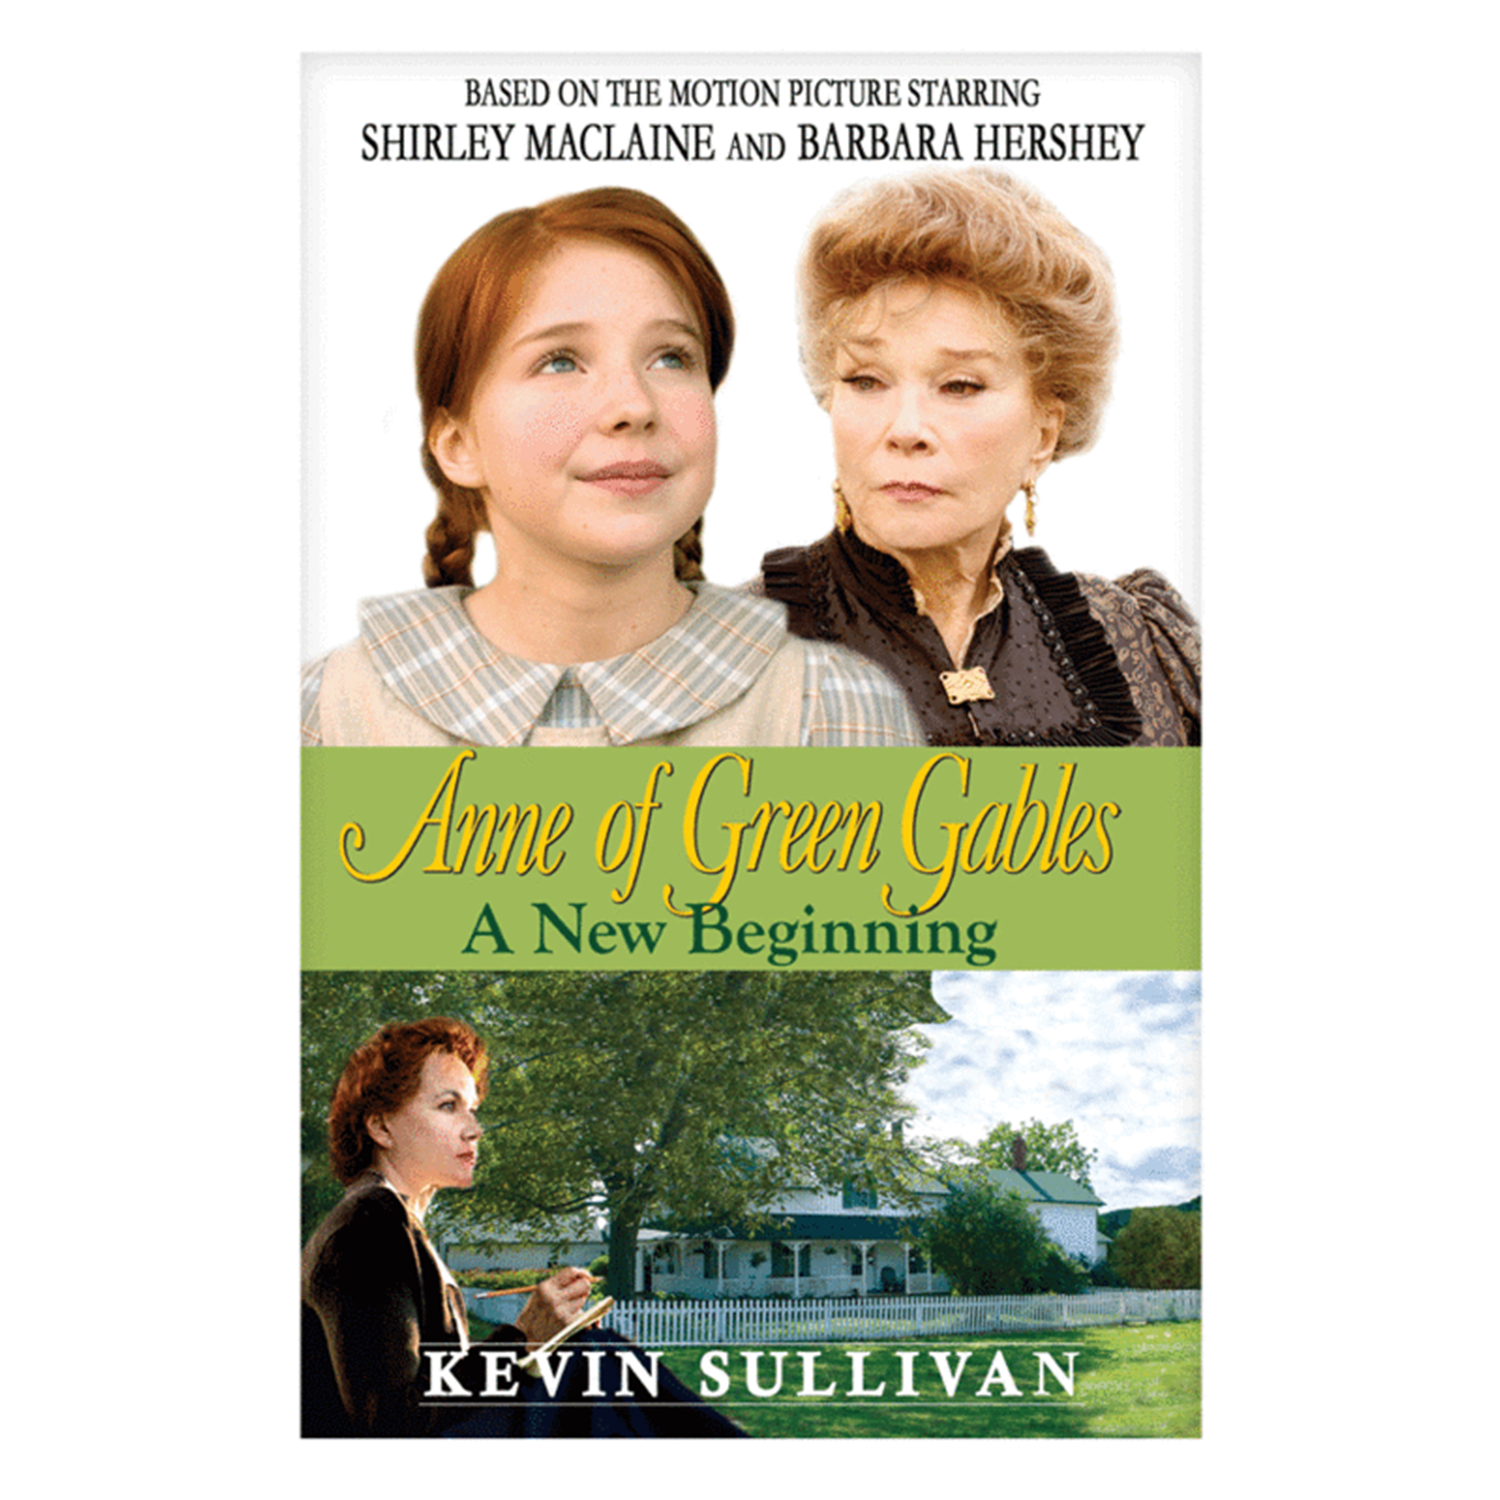 "Anne of Green Gables: A New Beginning" Paperback Novel by Kevin Sullivan